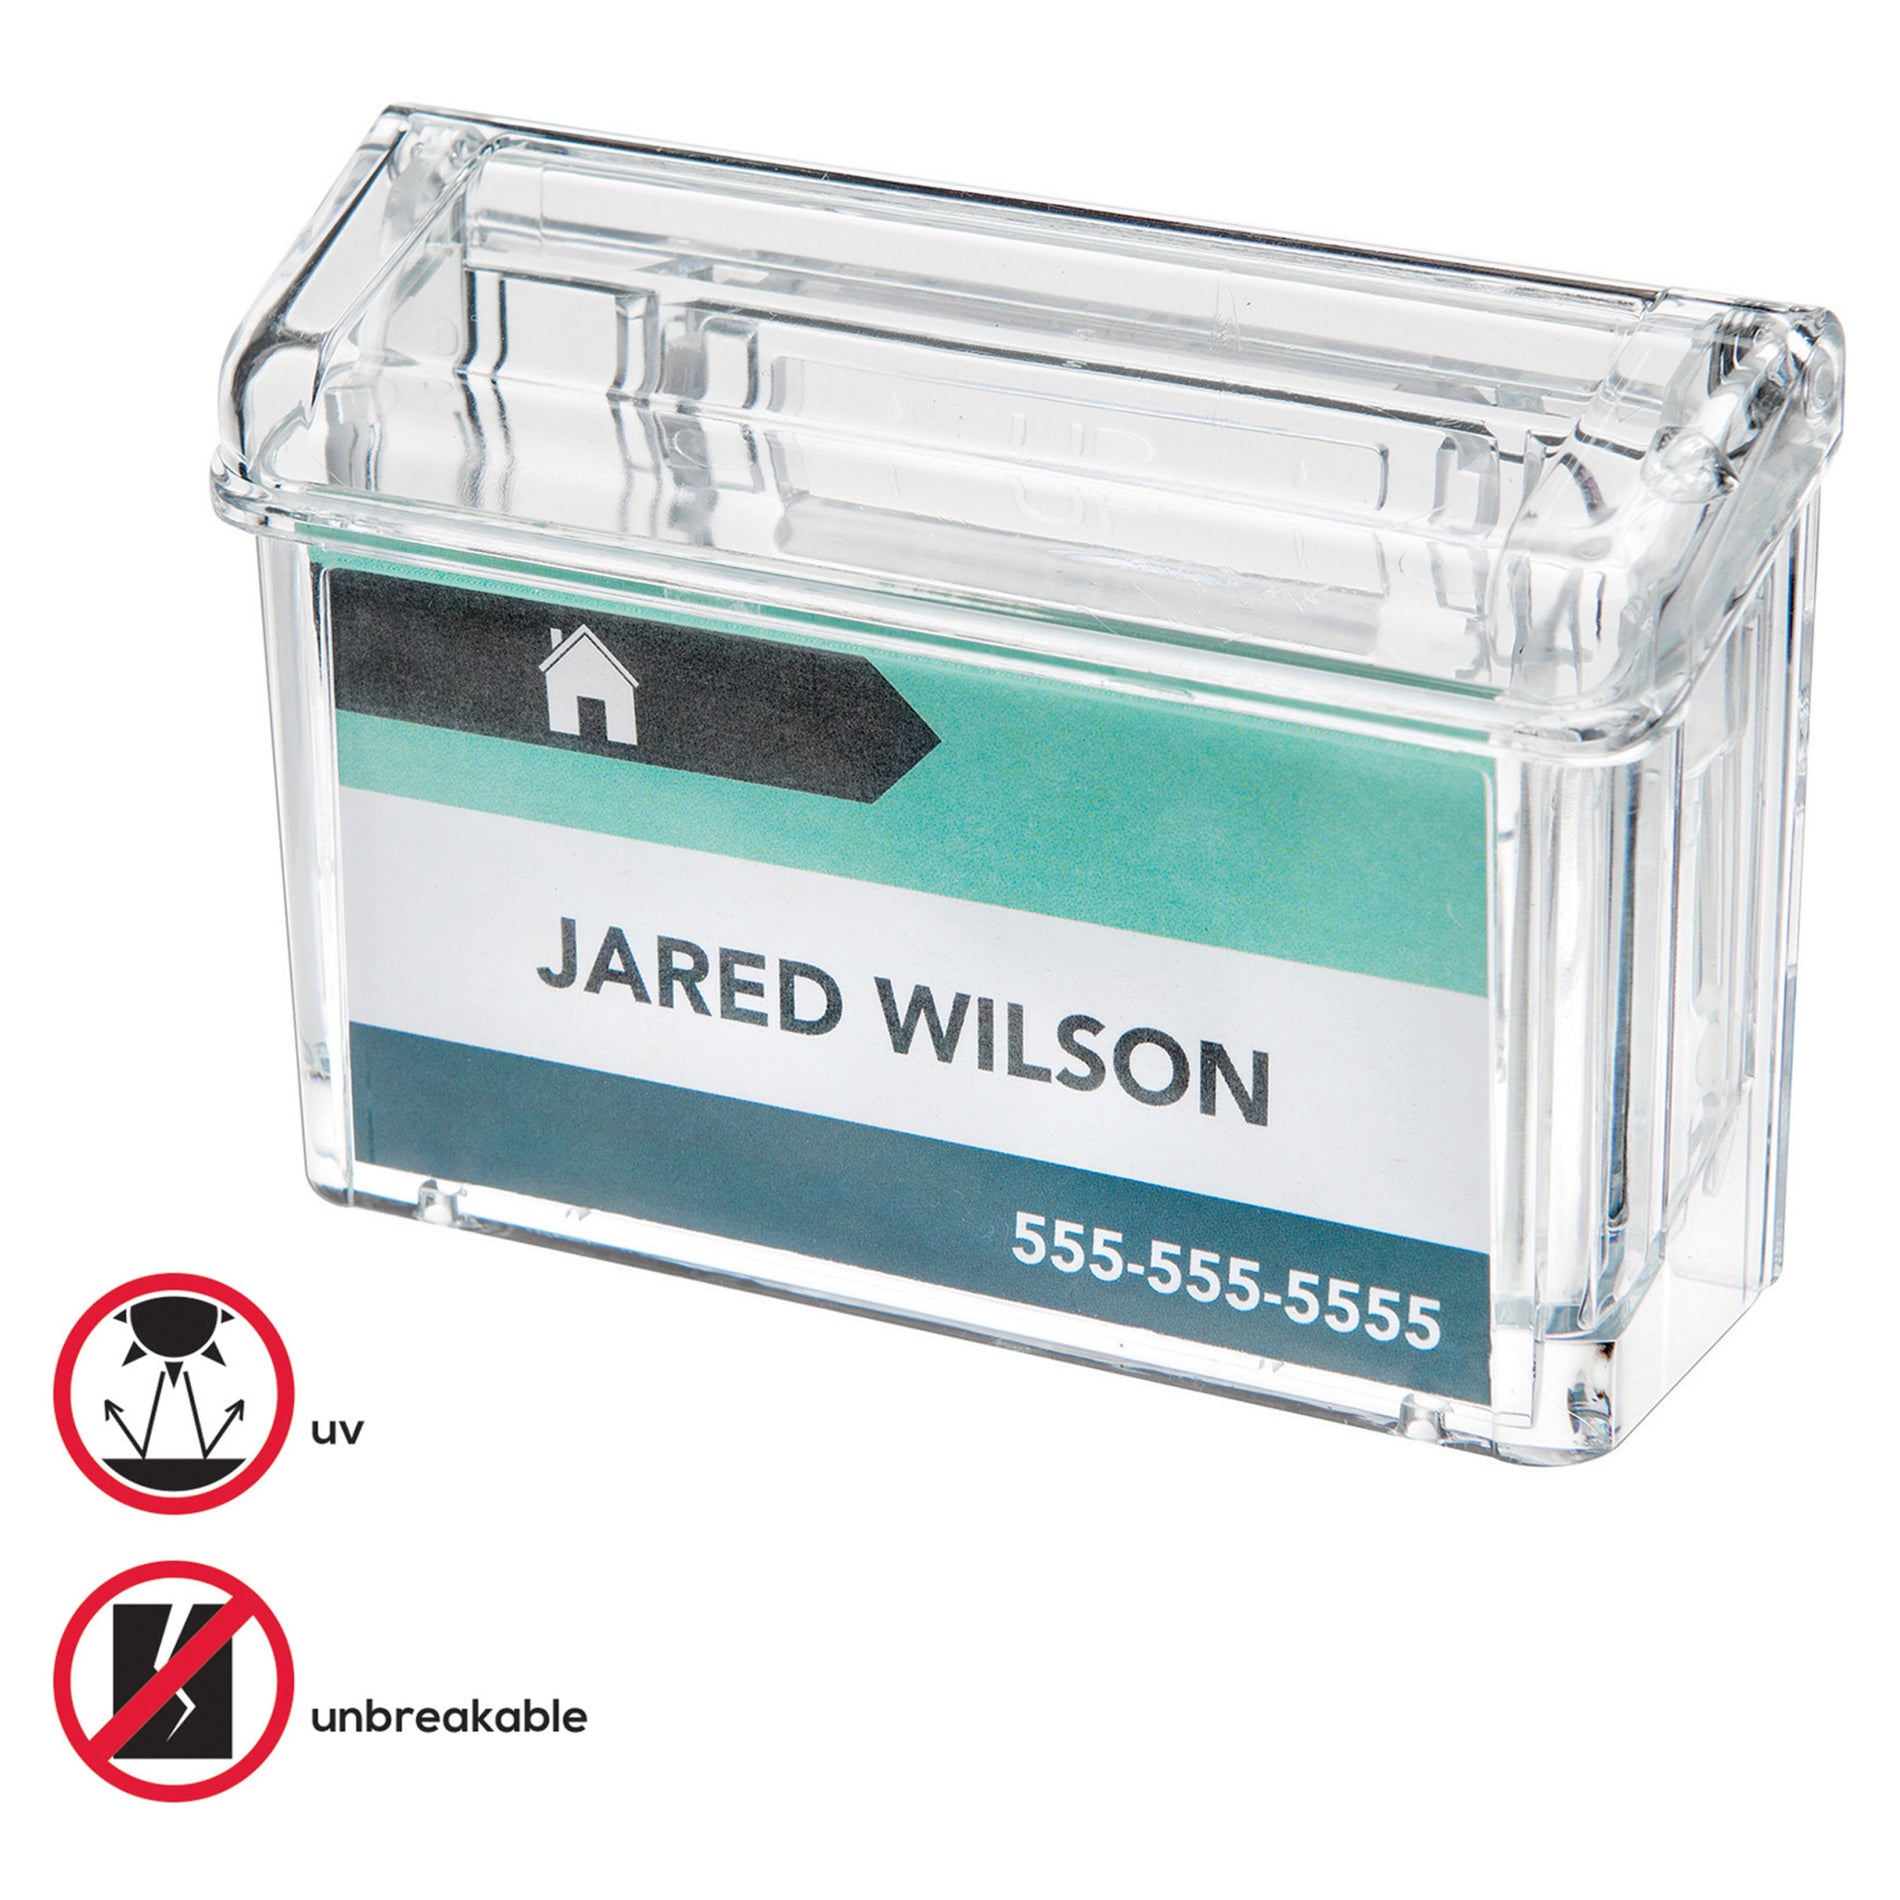 Deflecto 70901 Outdoor Business Card Holder Water Resistant Durable Clear